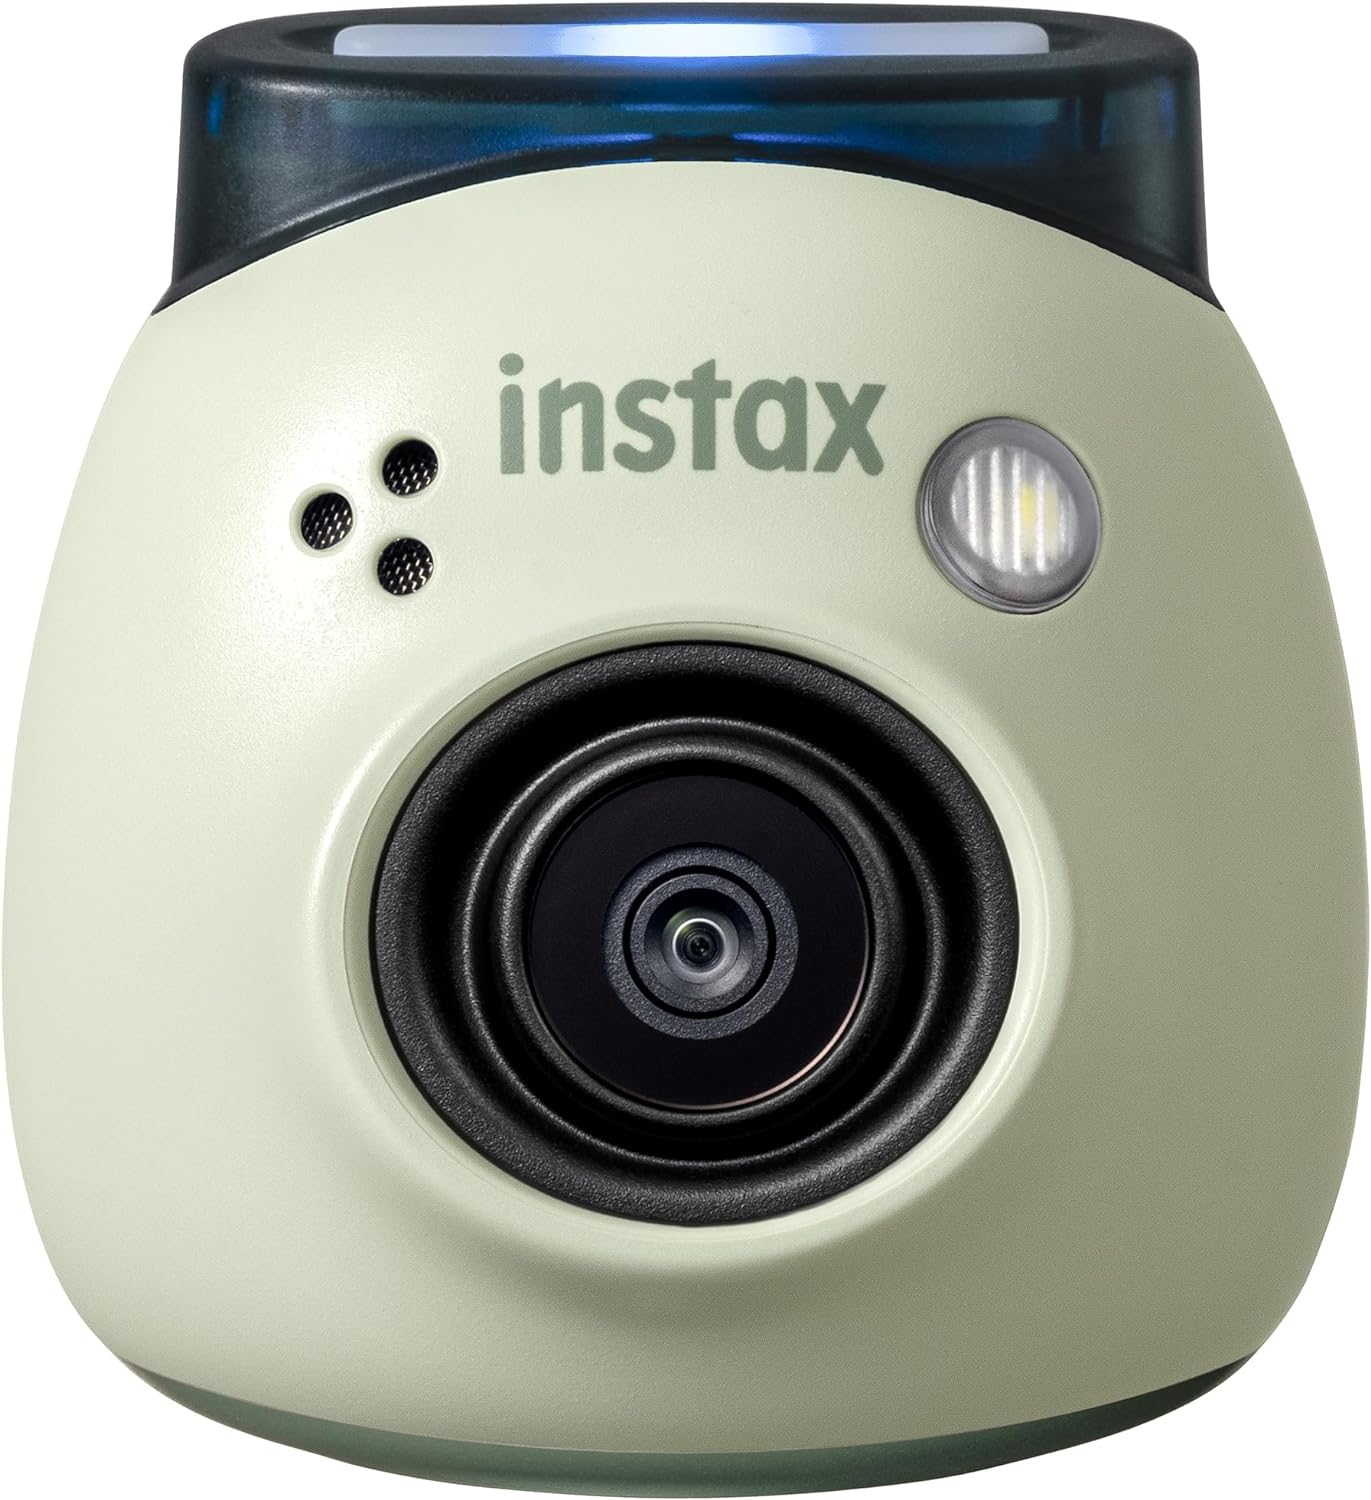 Fujifilm Instax PAL with Link 2 Smartphone Wireless Printerm and 10 Pack Film Bundle, Green - image 3 of 9